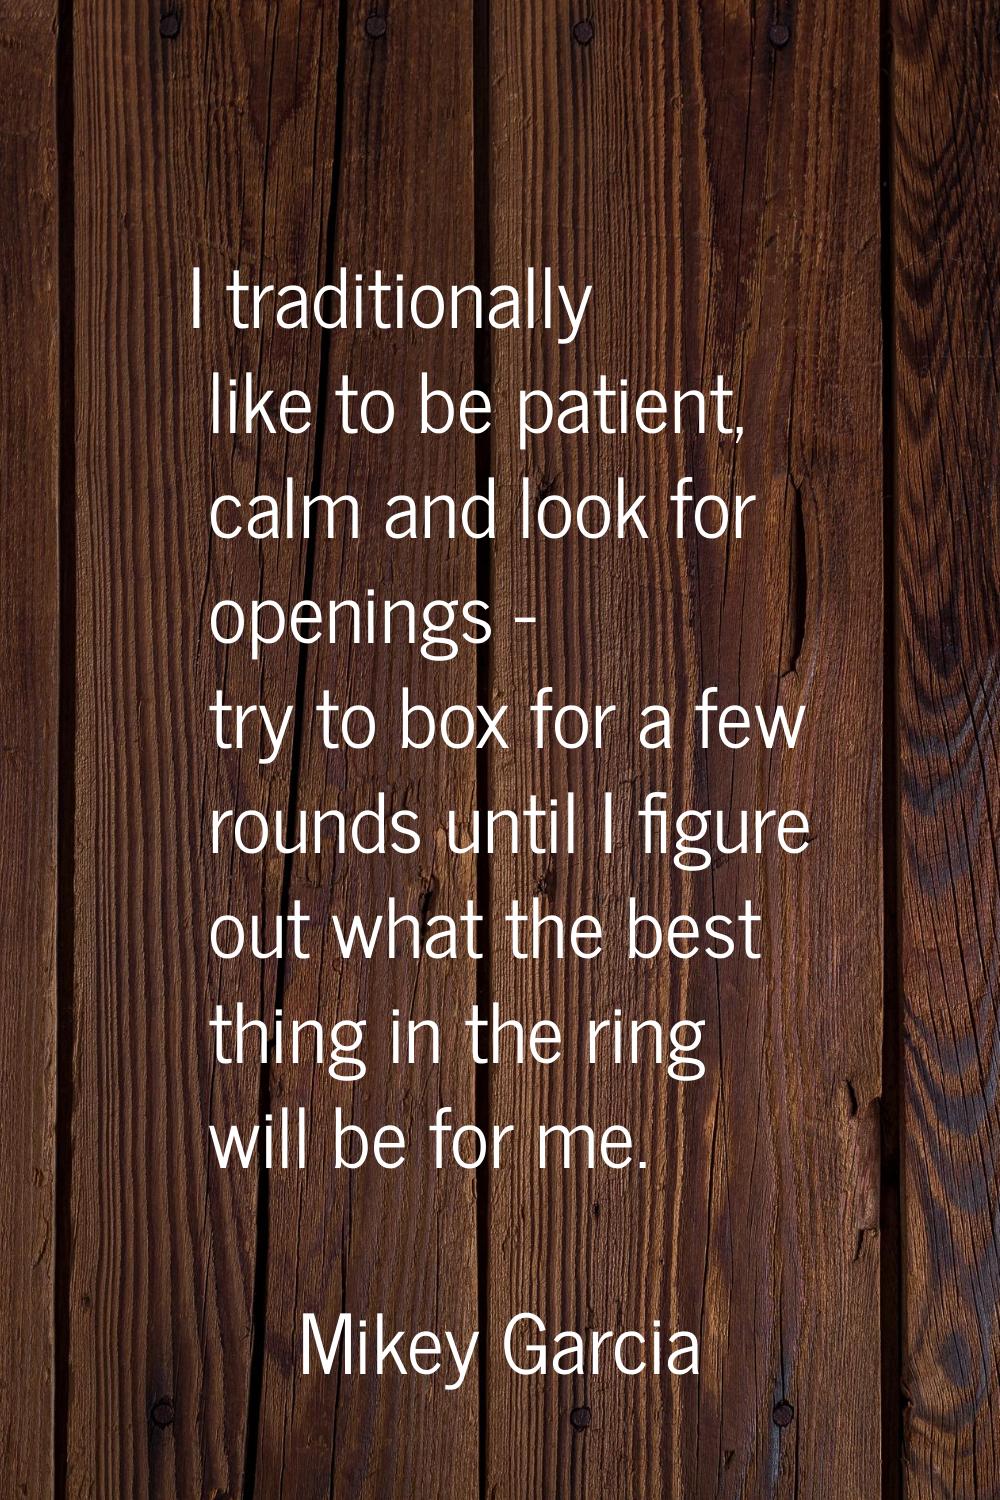 I traditionally like to be patient, calm and look for openings - try to box for a few rounds until 